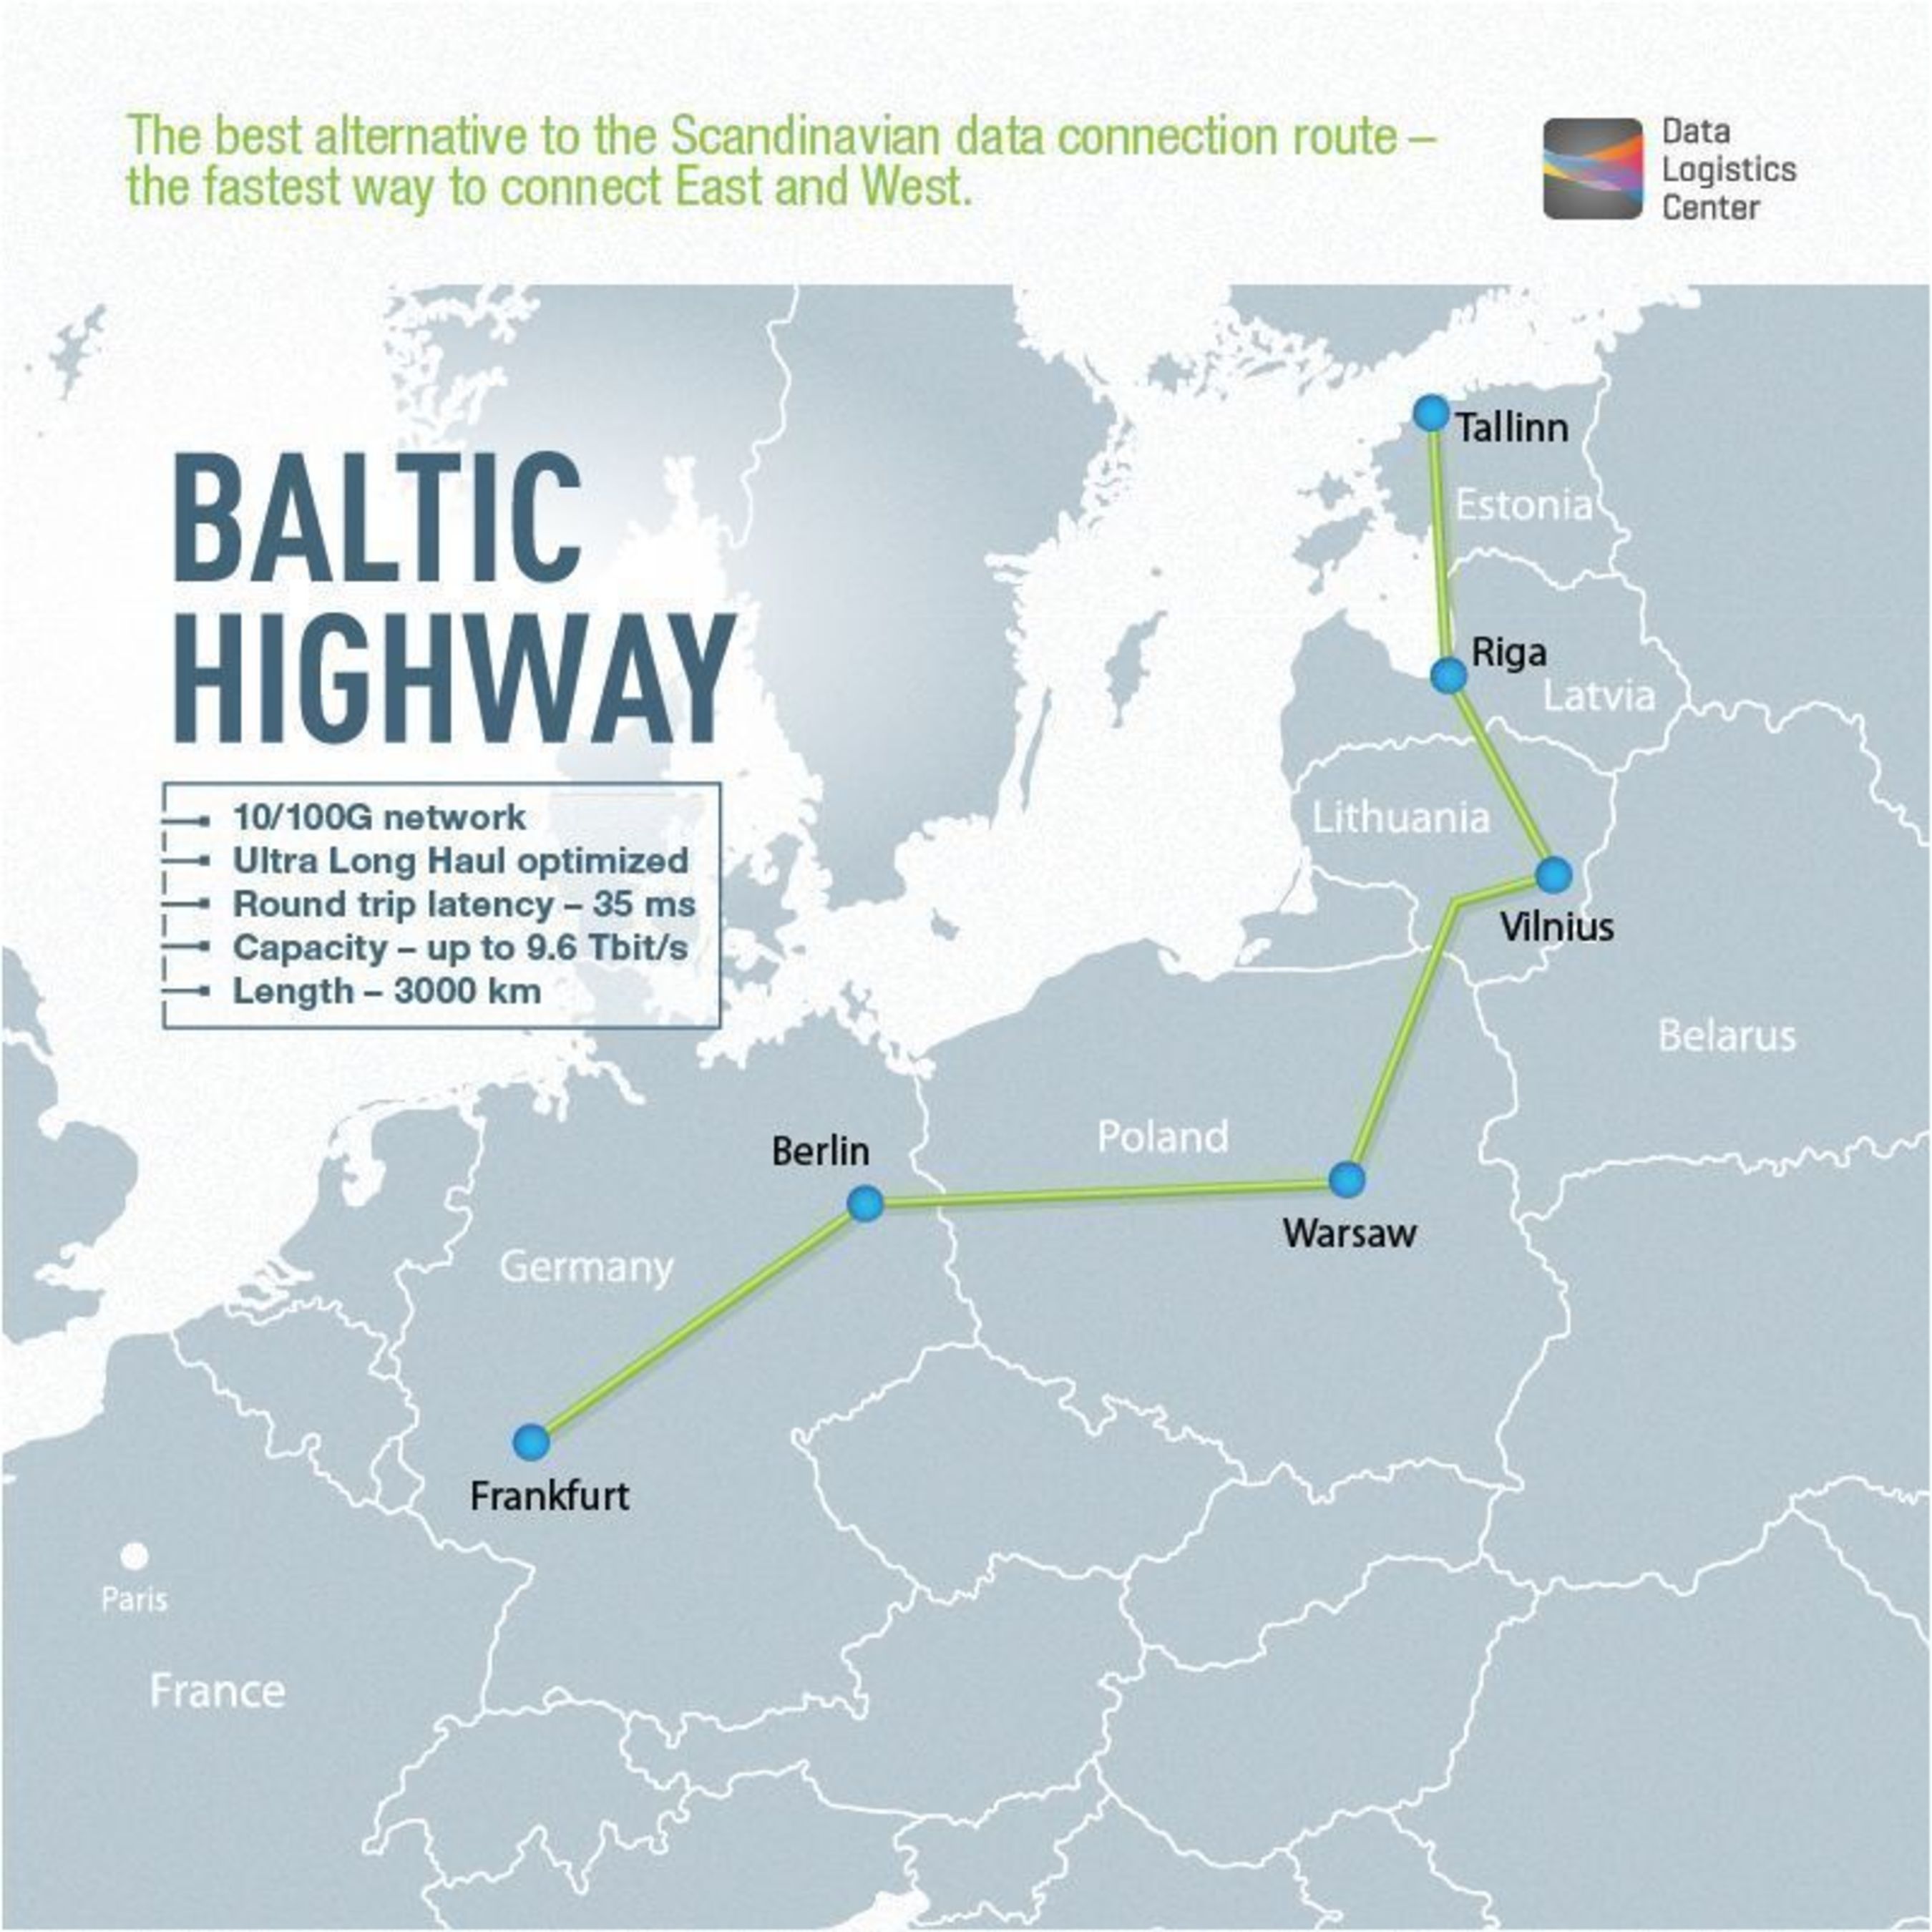 Baltic Highway âeuro" the fastest way to connect East and West (PRNewsFoto/Data Logistics Center)